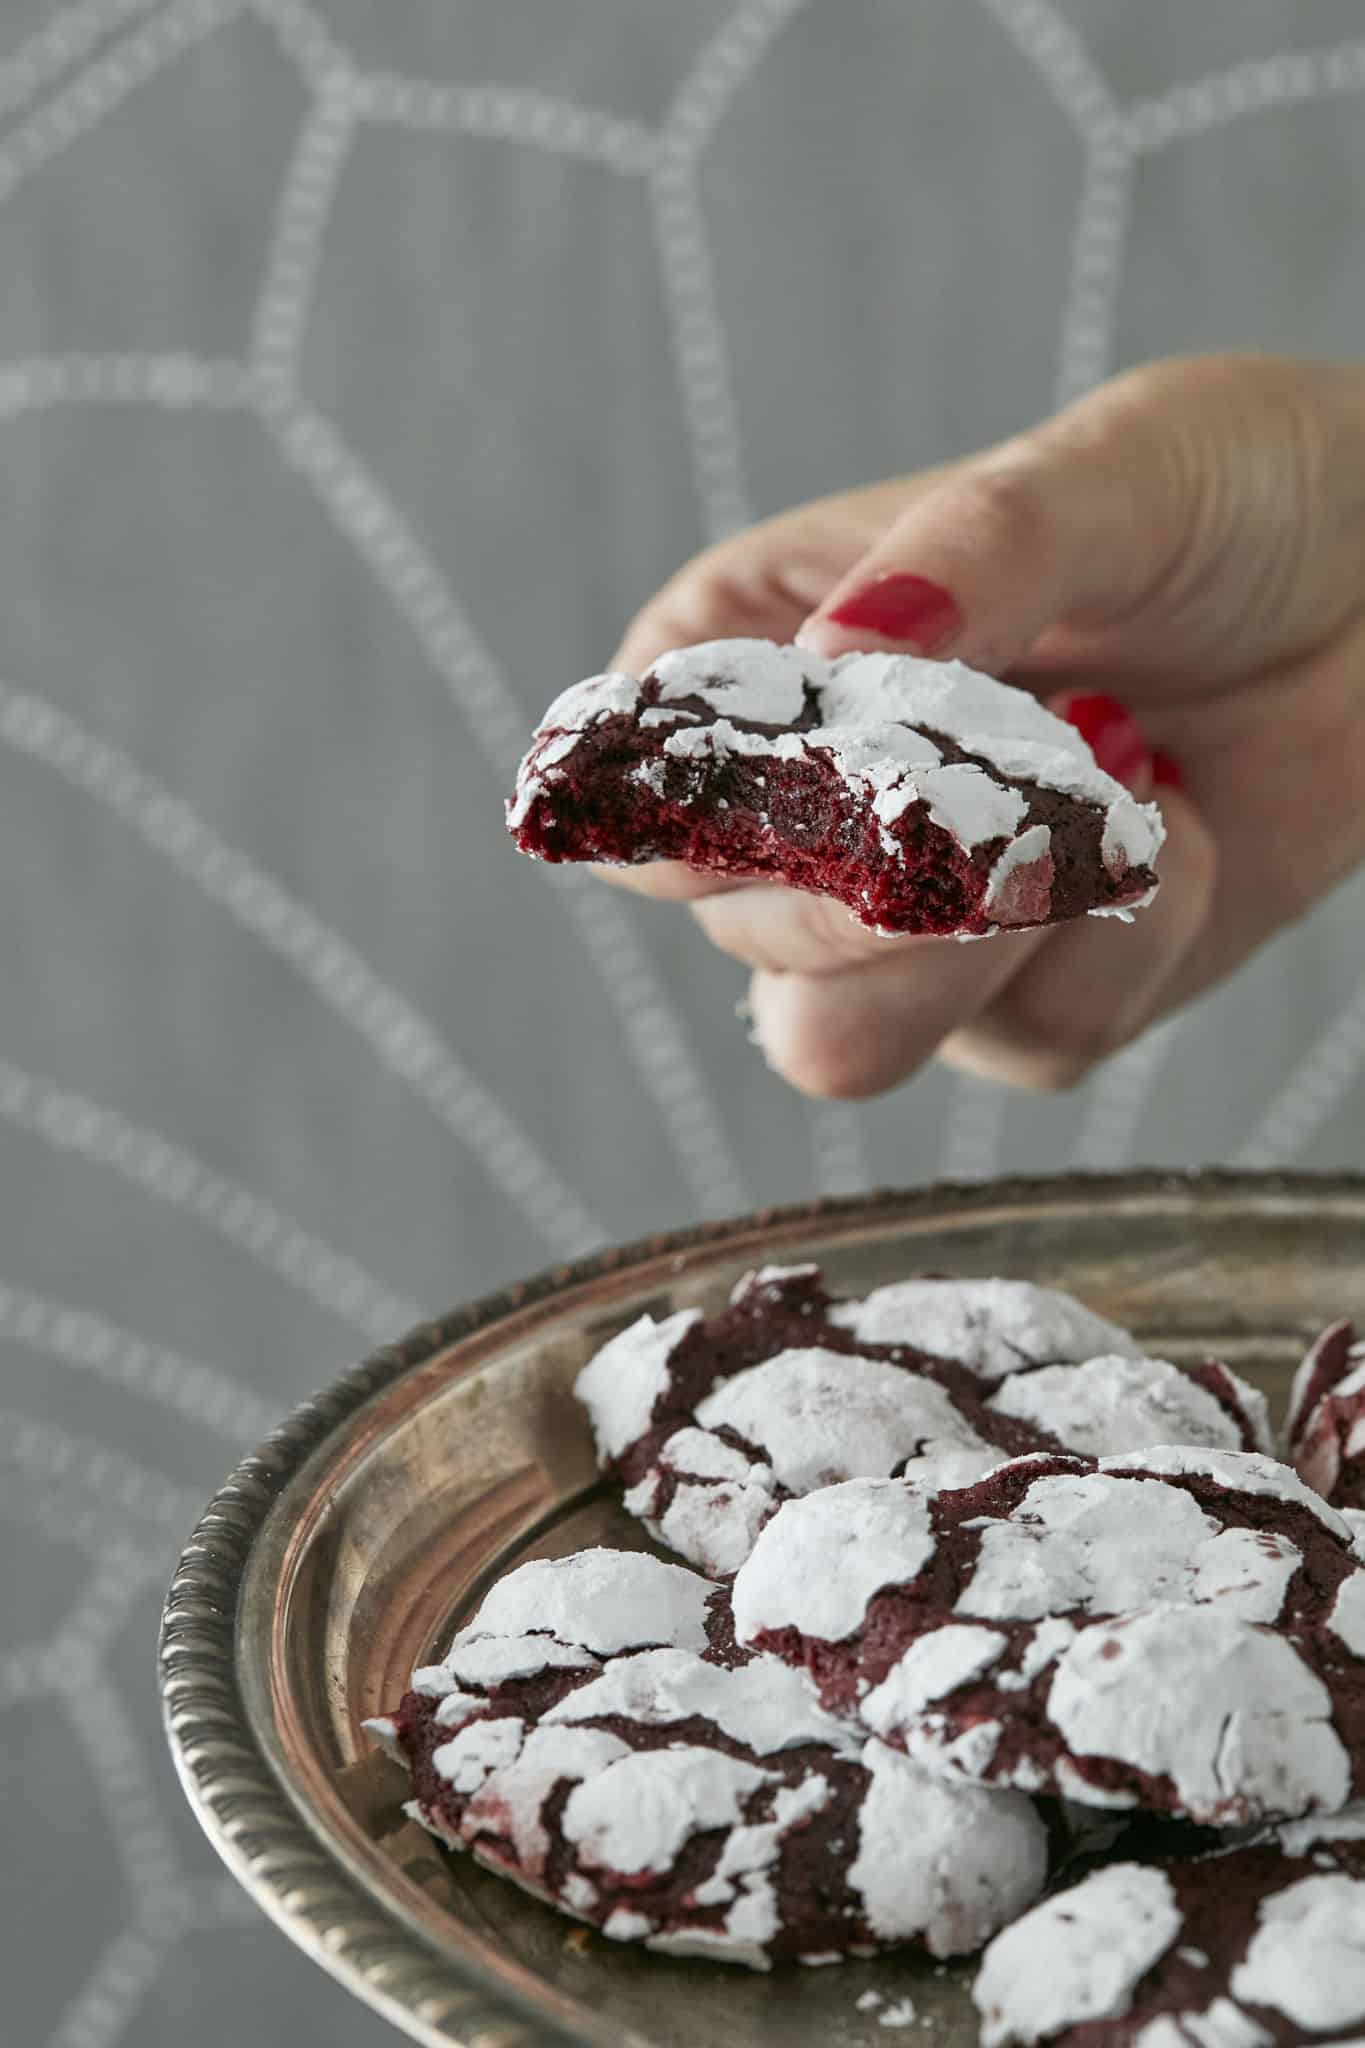 A closeup image of a bite taken out of a Red Velvet Crinkle Cookie shows how moist and chewy the cake-like cookie is, as well as it's iconic powdered sugar coating.